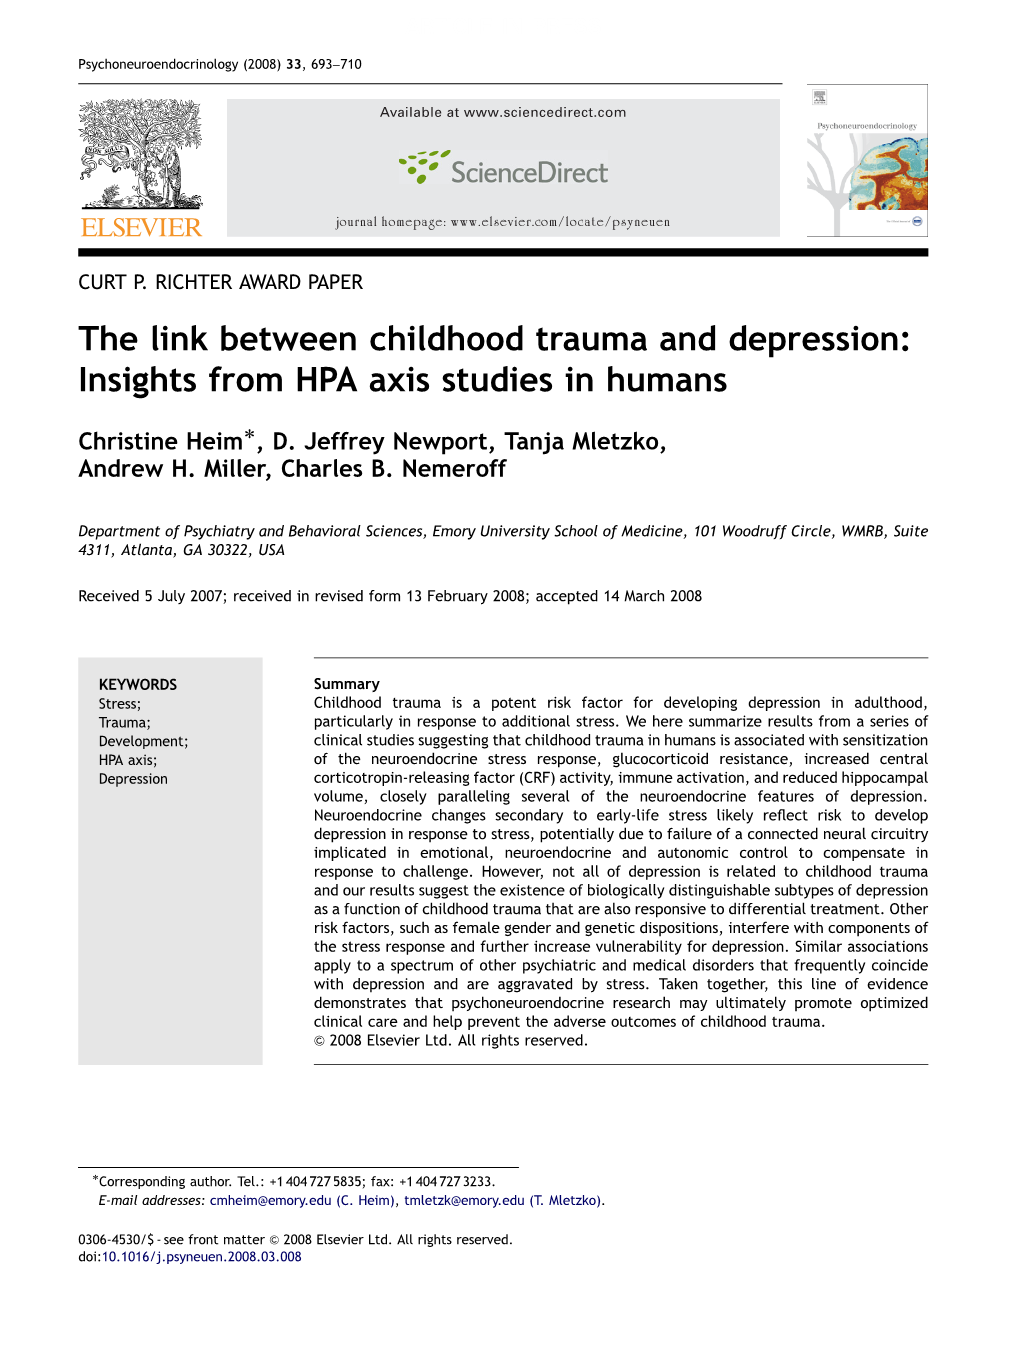 The Link Between Childhood Trauma and Depression: Insights from HPA Axis Studies in Humans